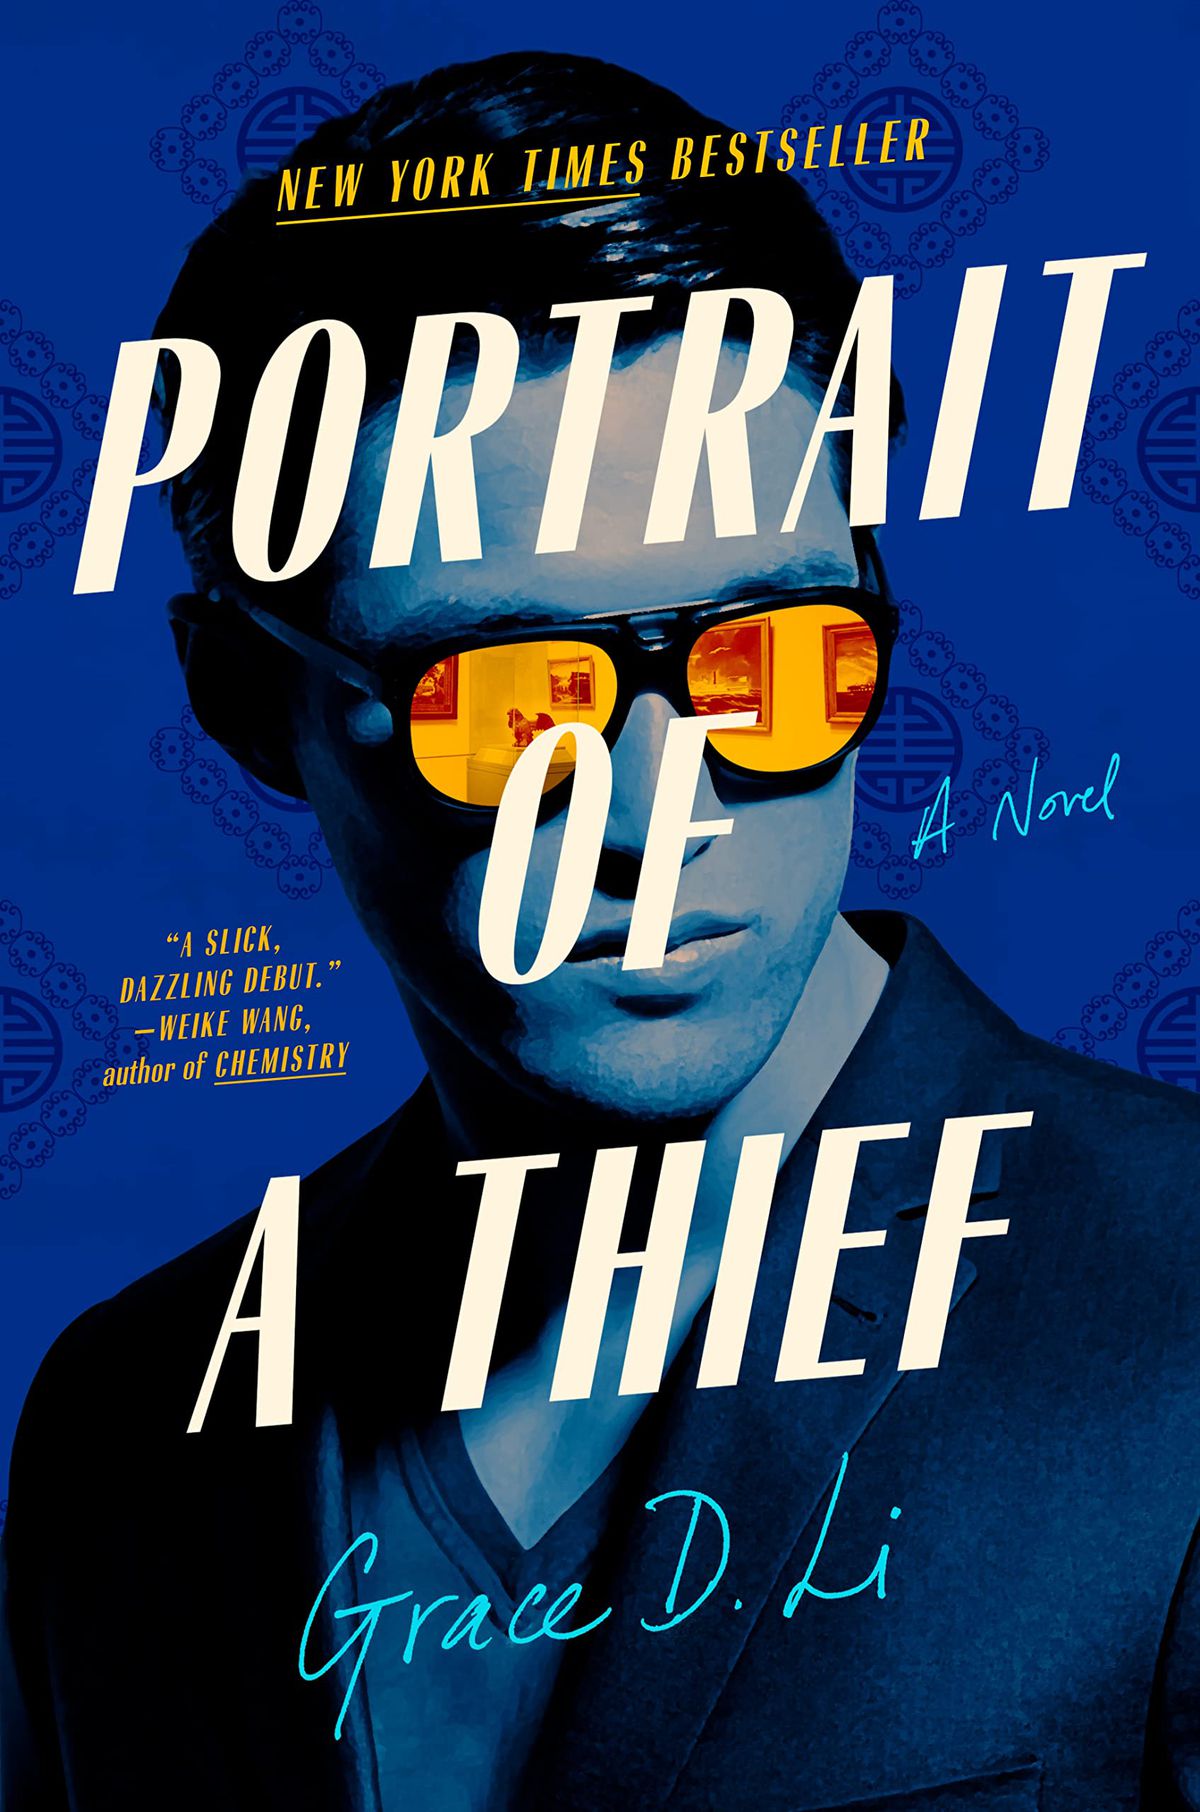 The cover of Portrait of a Thief, which depicts a portrait of an Asian, with a blue stain and bright orange reflective sunglasses.